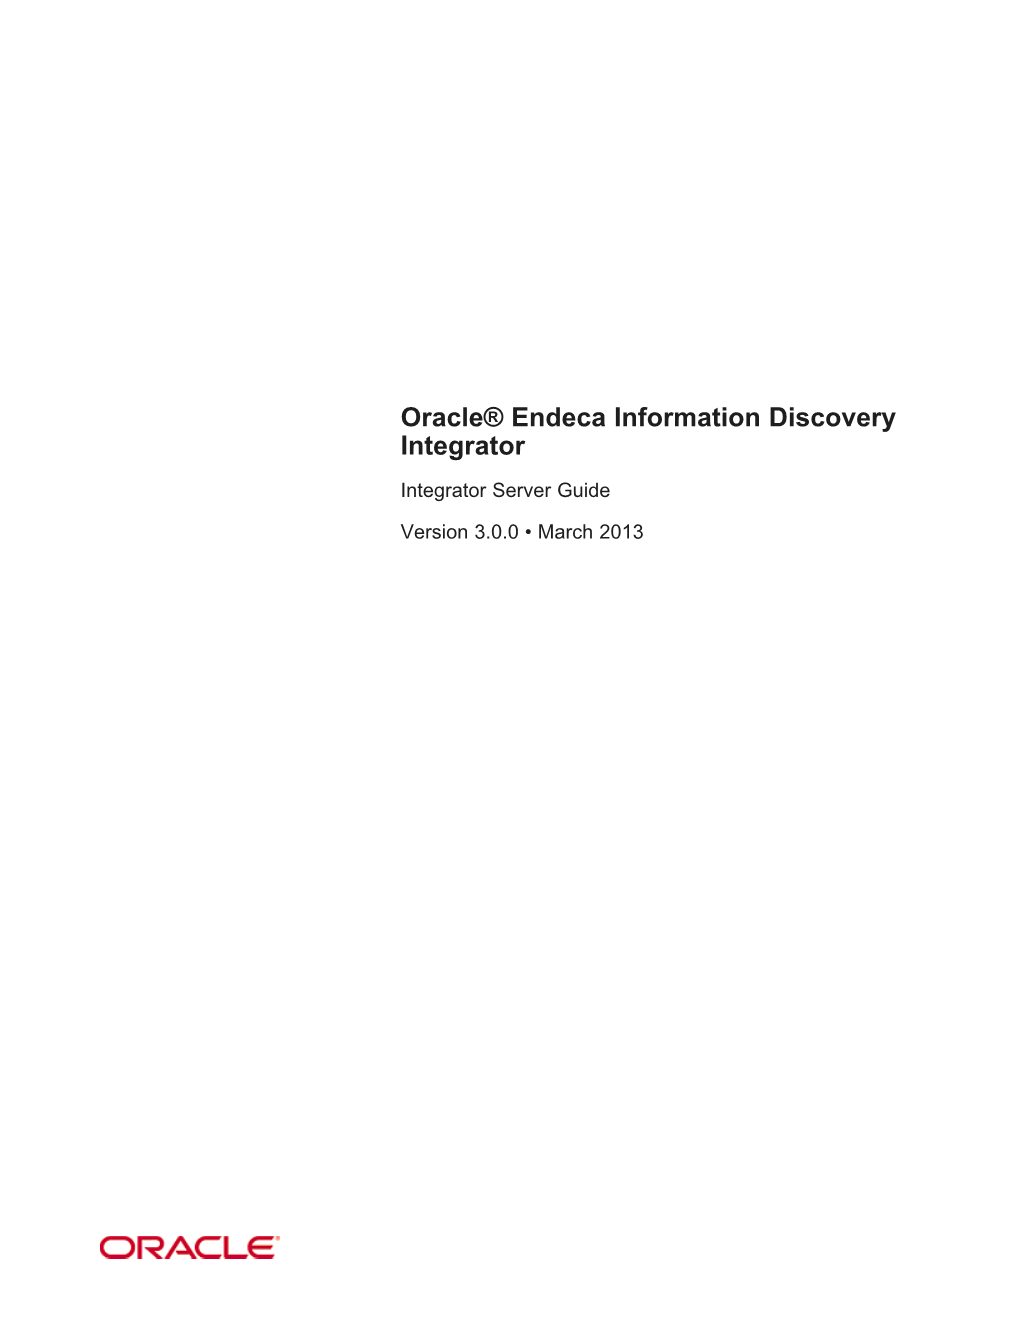 Oracle® Endeca Information Discovery Integrator